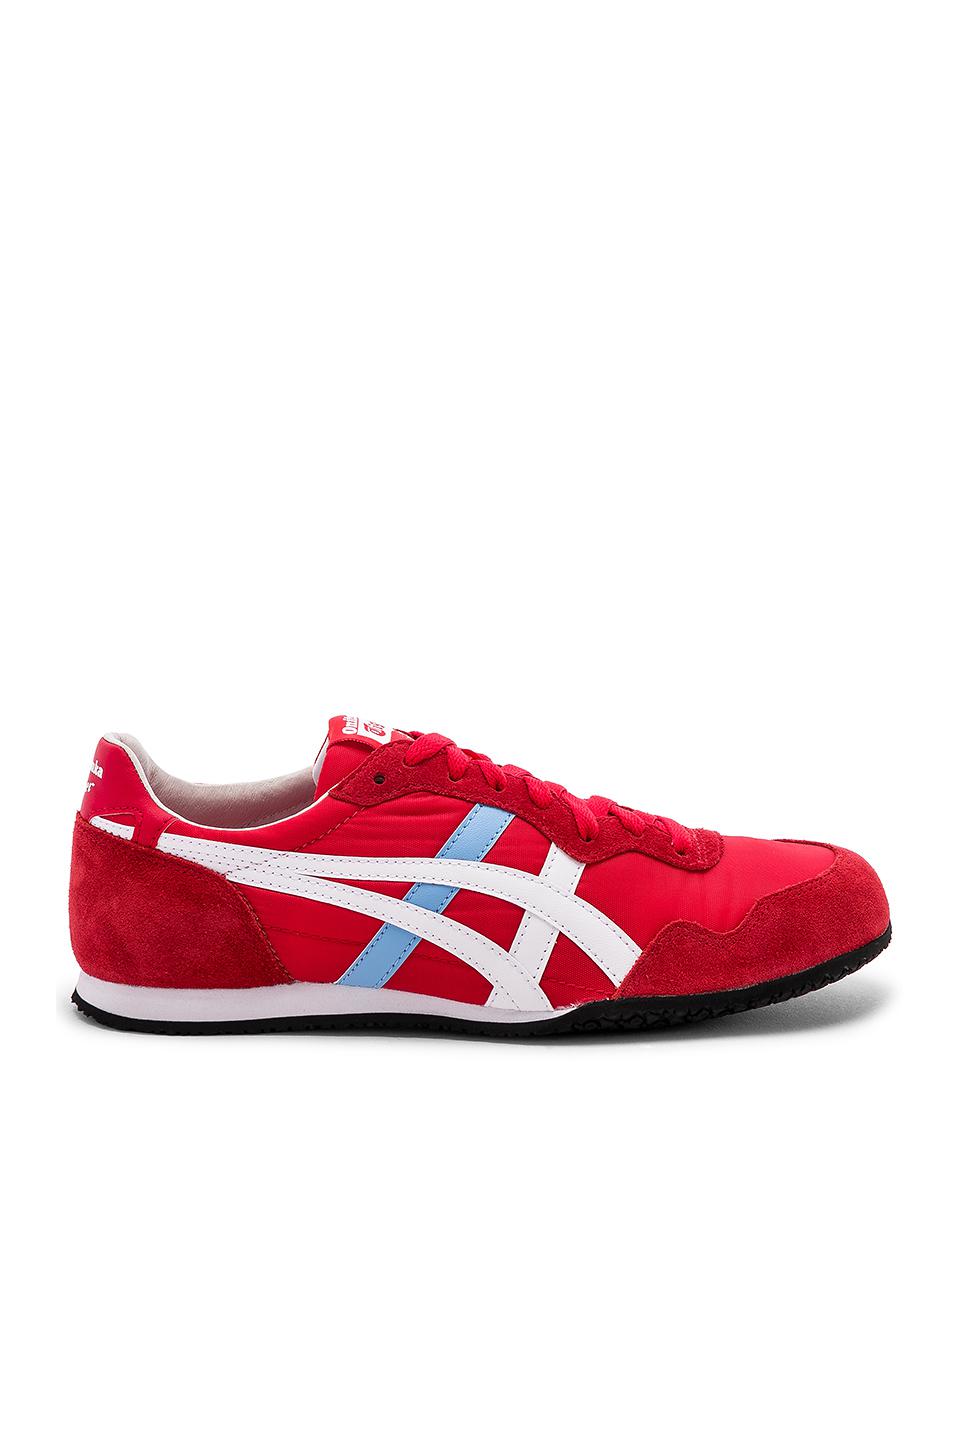 Onitsuka Tiger Leather Serrano In Red for Men - Lyst